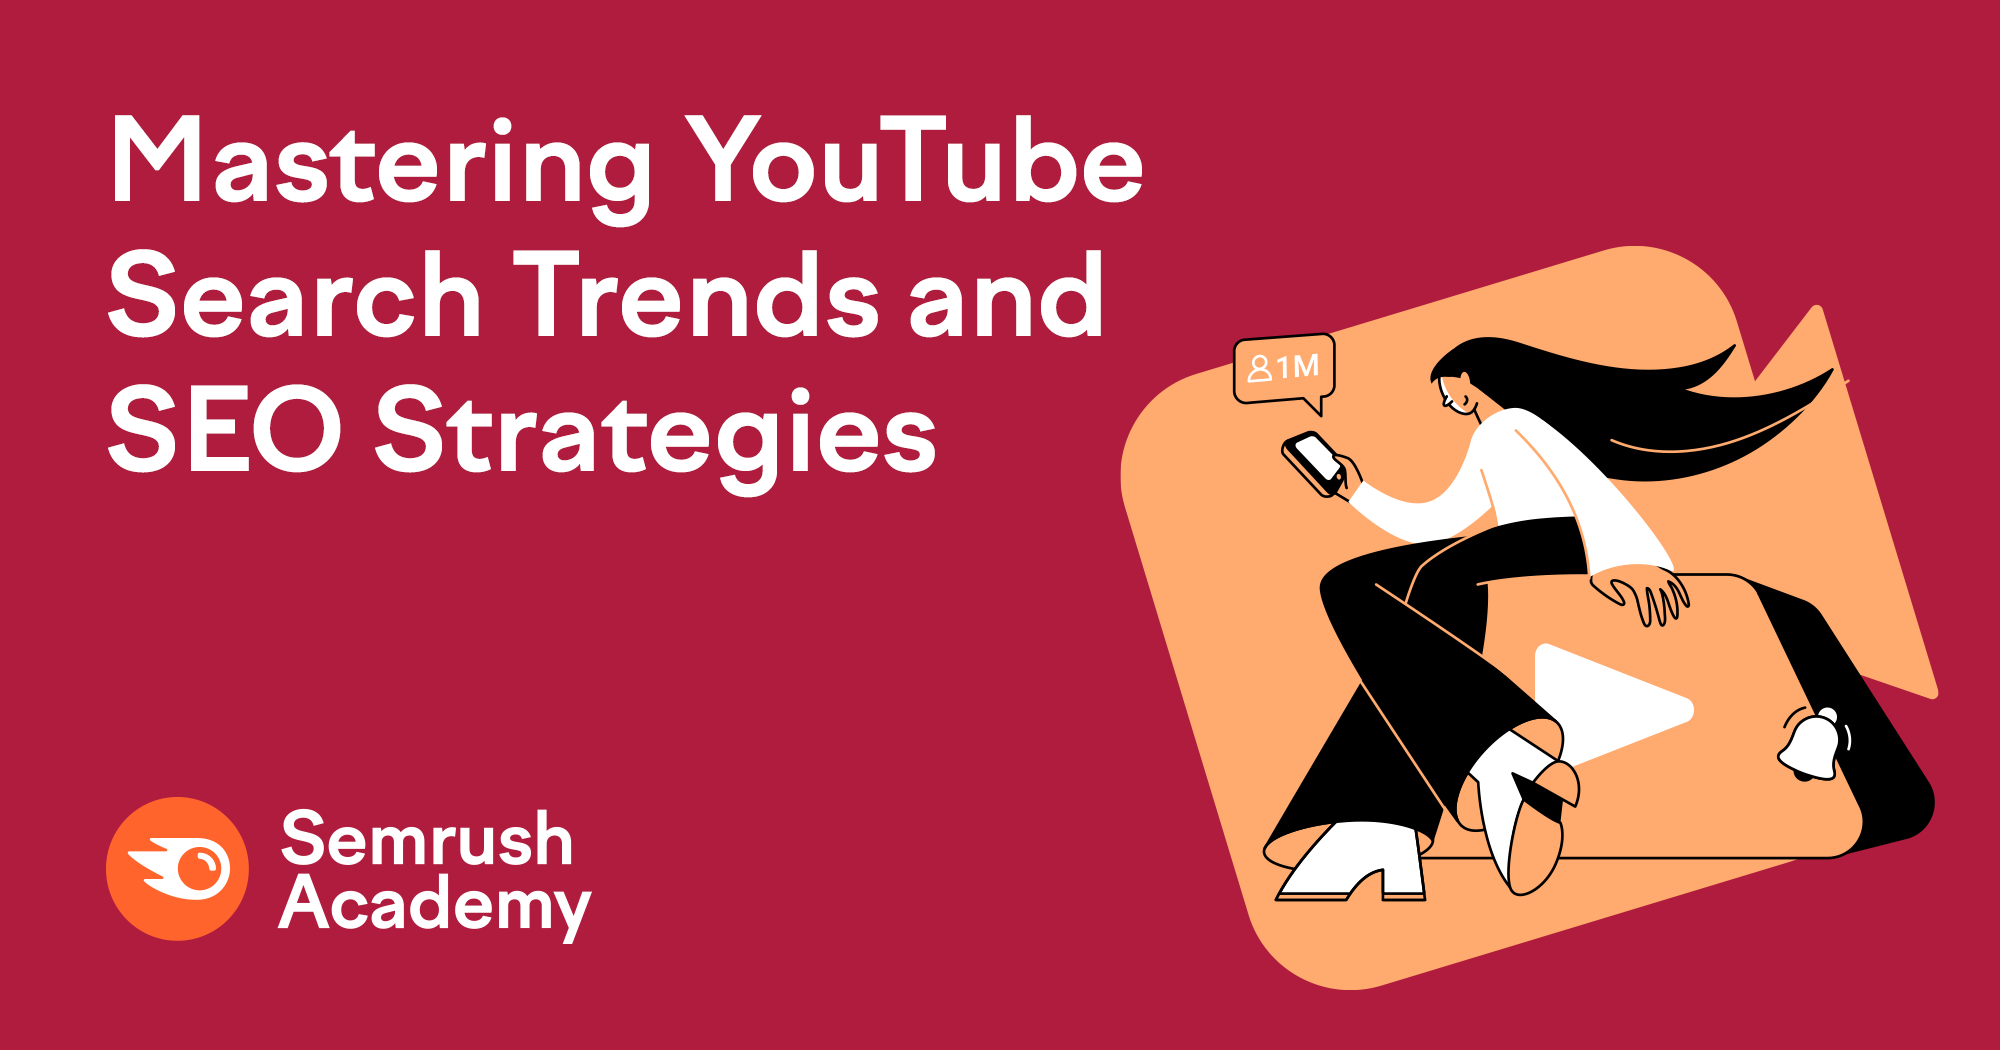 Master YouTube SEO Strategies and Search Trends